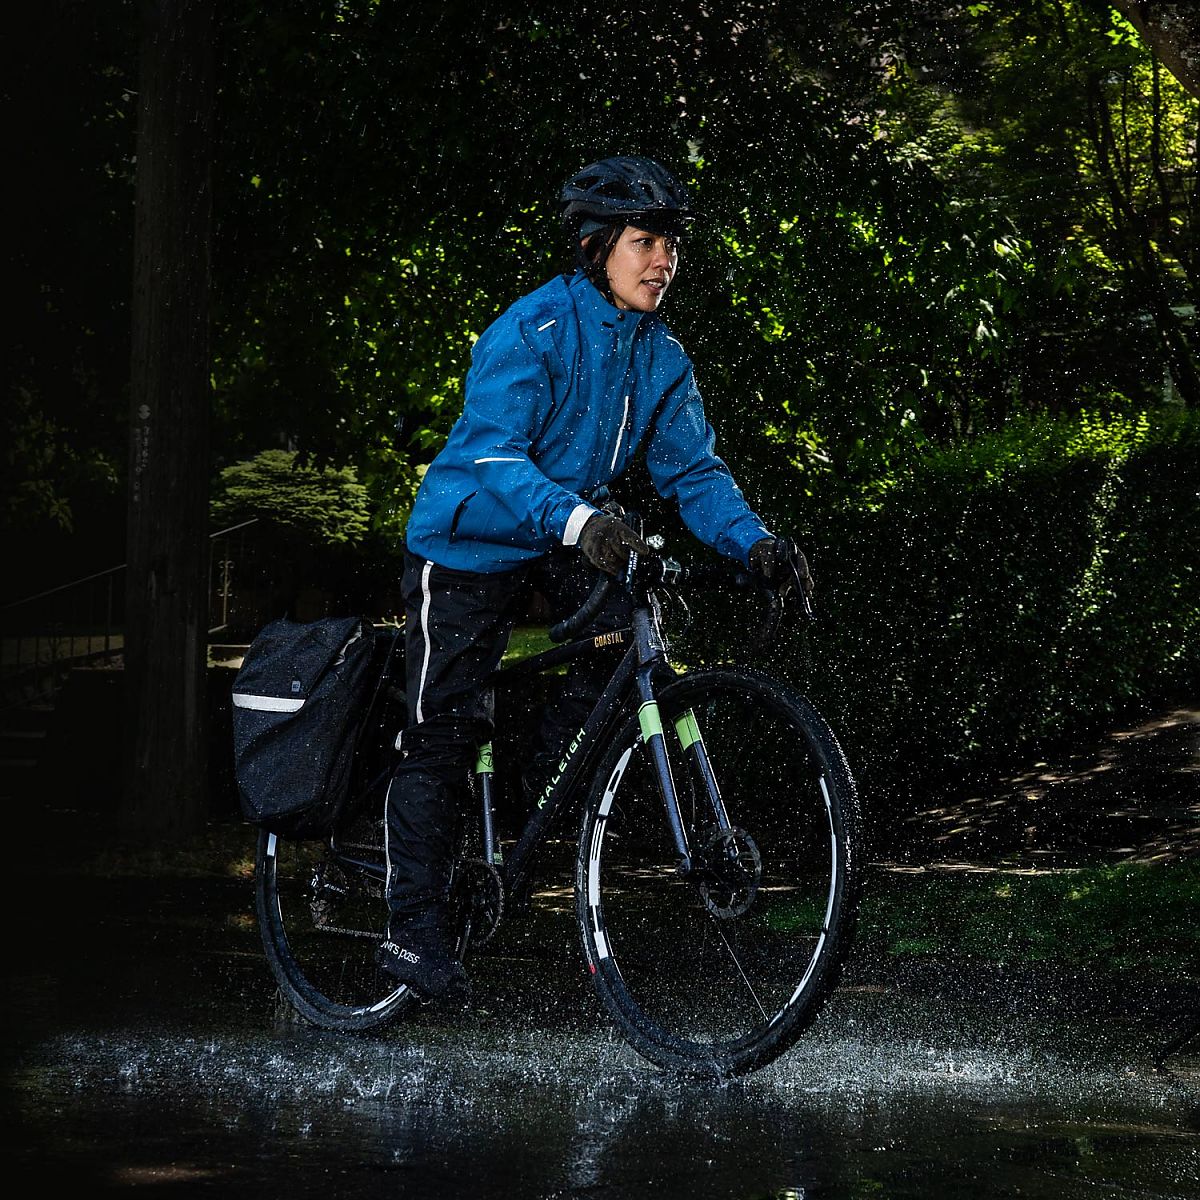 Showers Pass uses sustainable dyes in updated Transit rain jacket